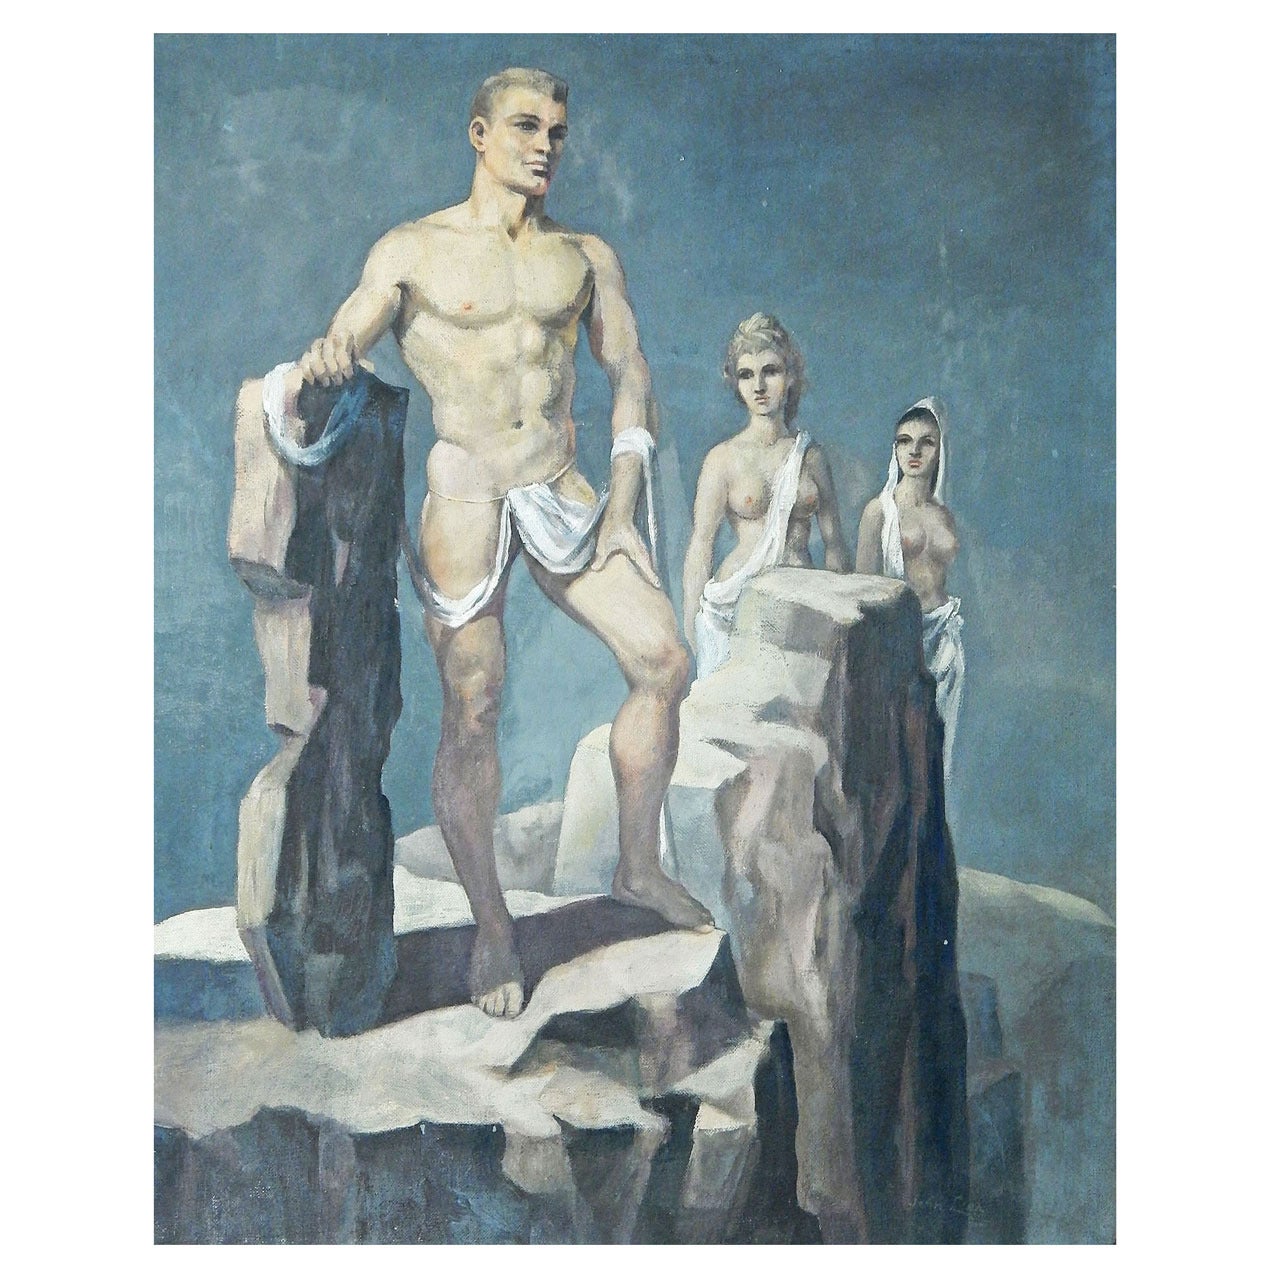 "Trio, " Rare and Early Oil Painting of Three Nudes in Surreal Landscape by Lear